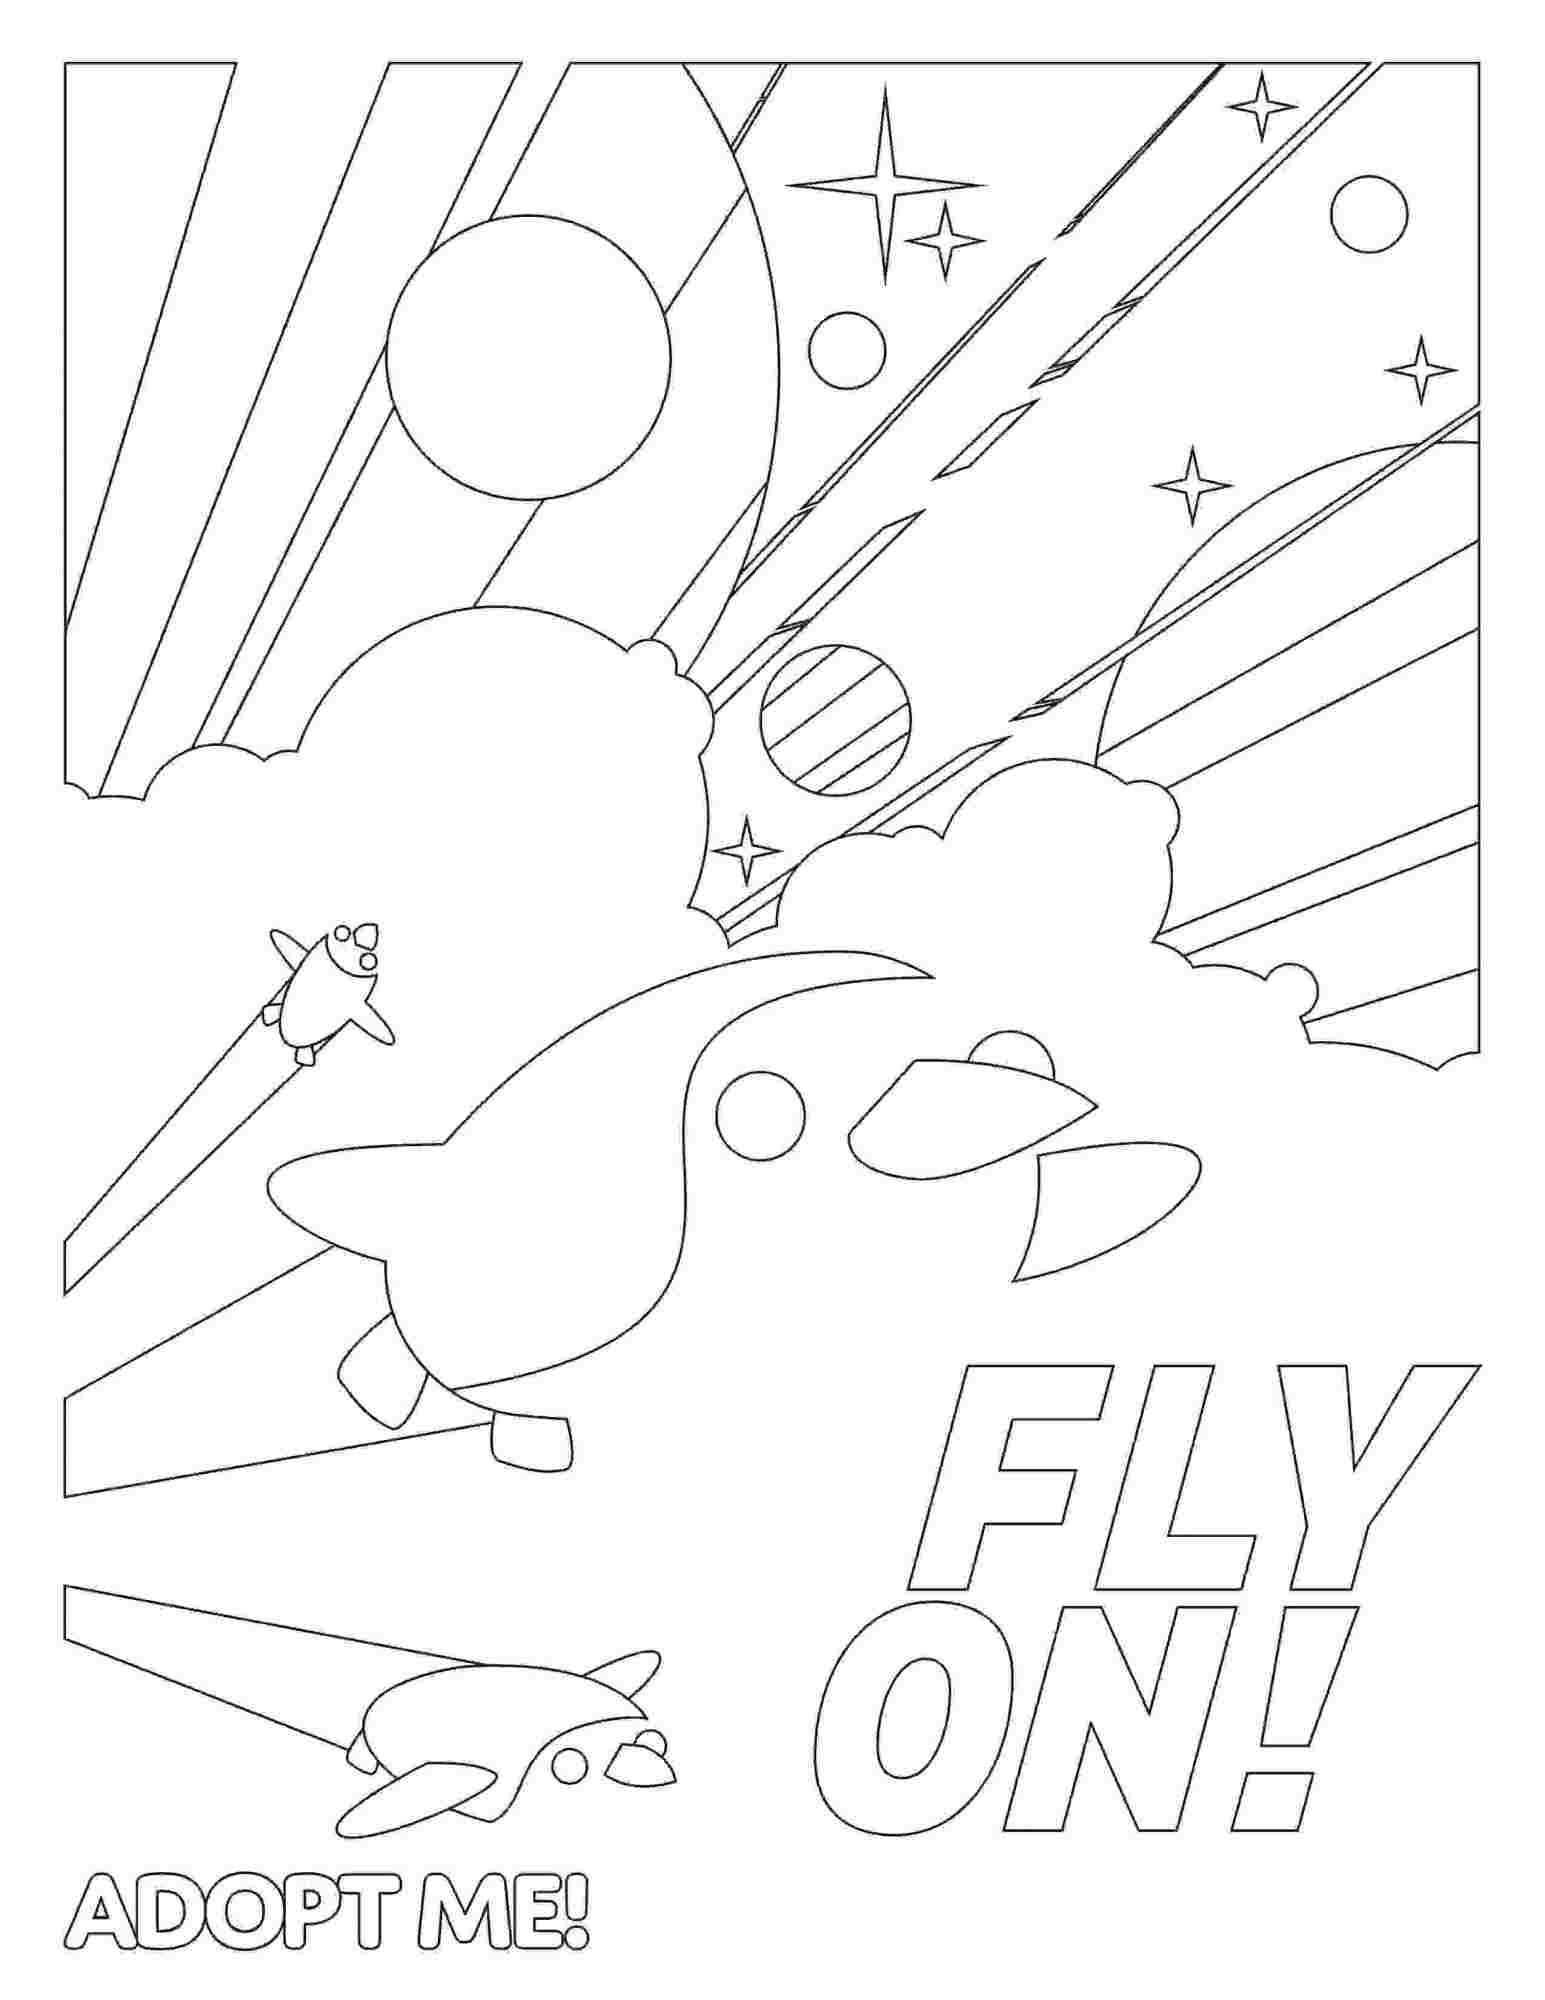 Adopt me Fly on the moment on poster Coloring Pages - Adopt me Coloring